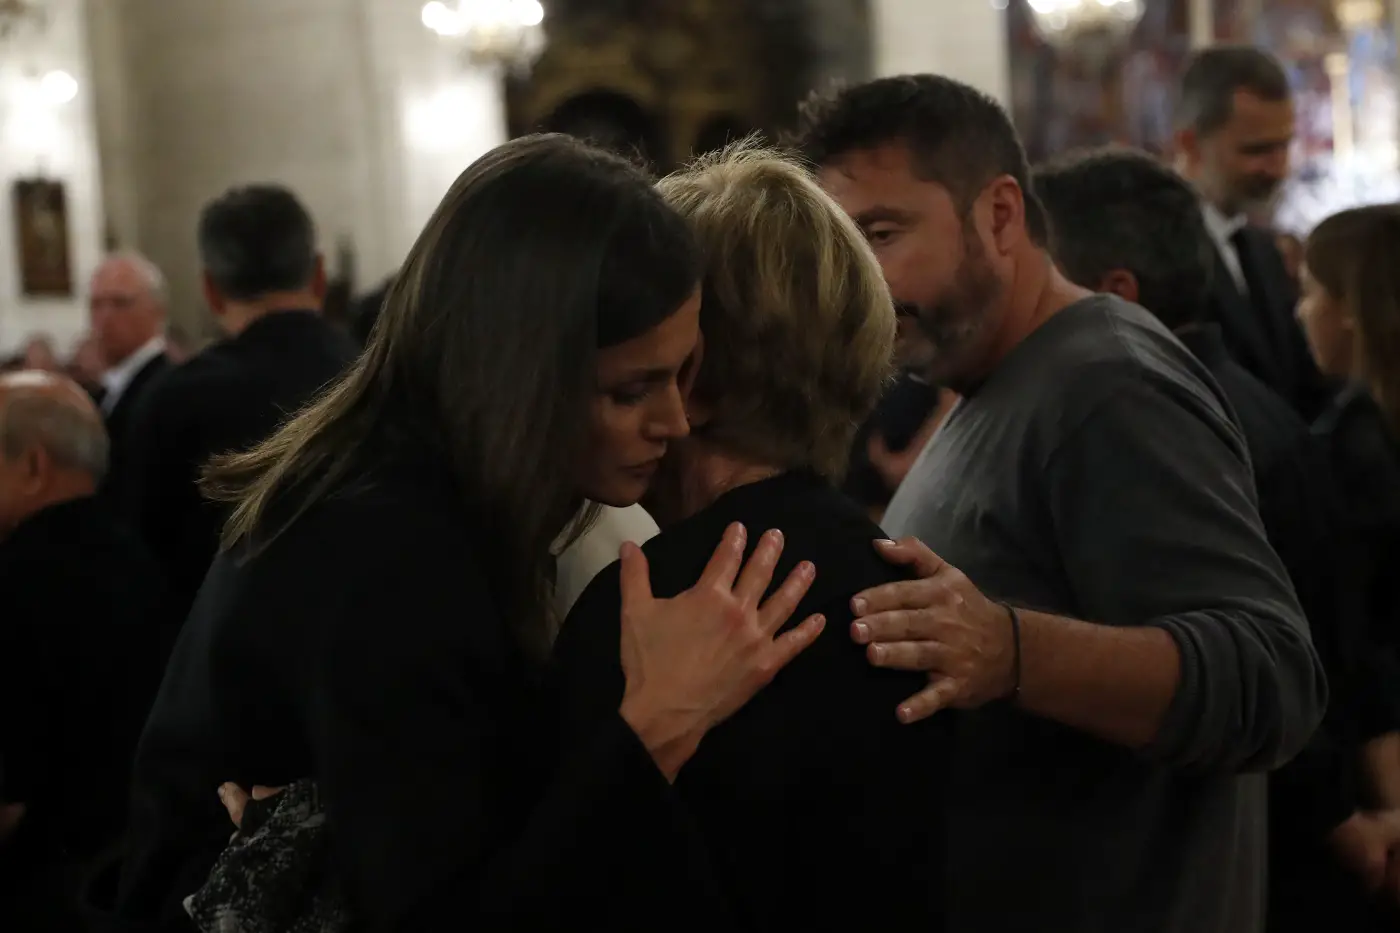 King Felipe and Queen Letizia attended Funeral Mass for the Flood Victims